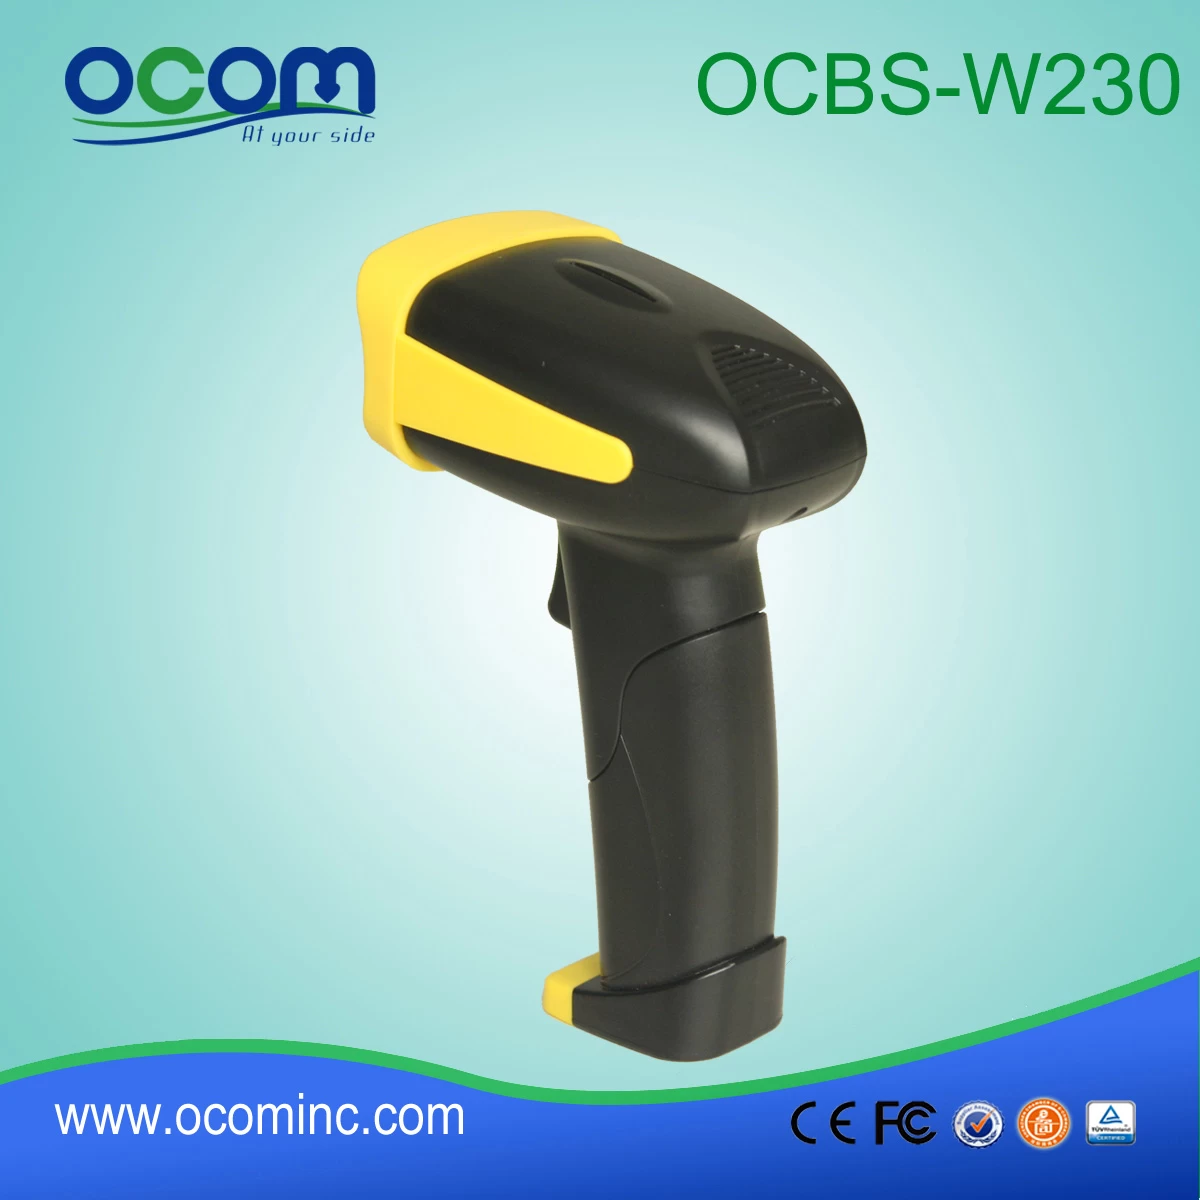 profesional android 2d barcode scanner reader portable